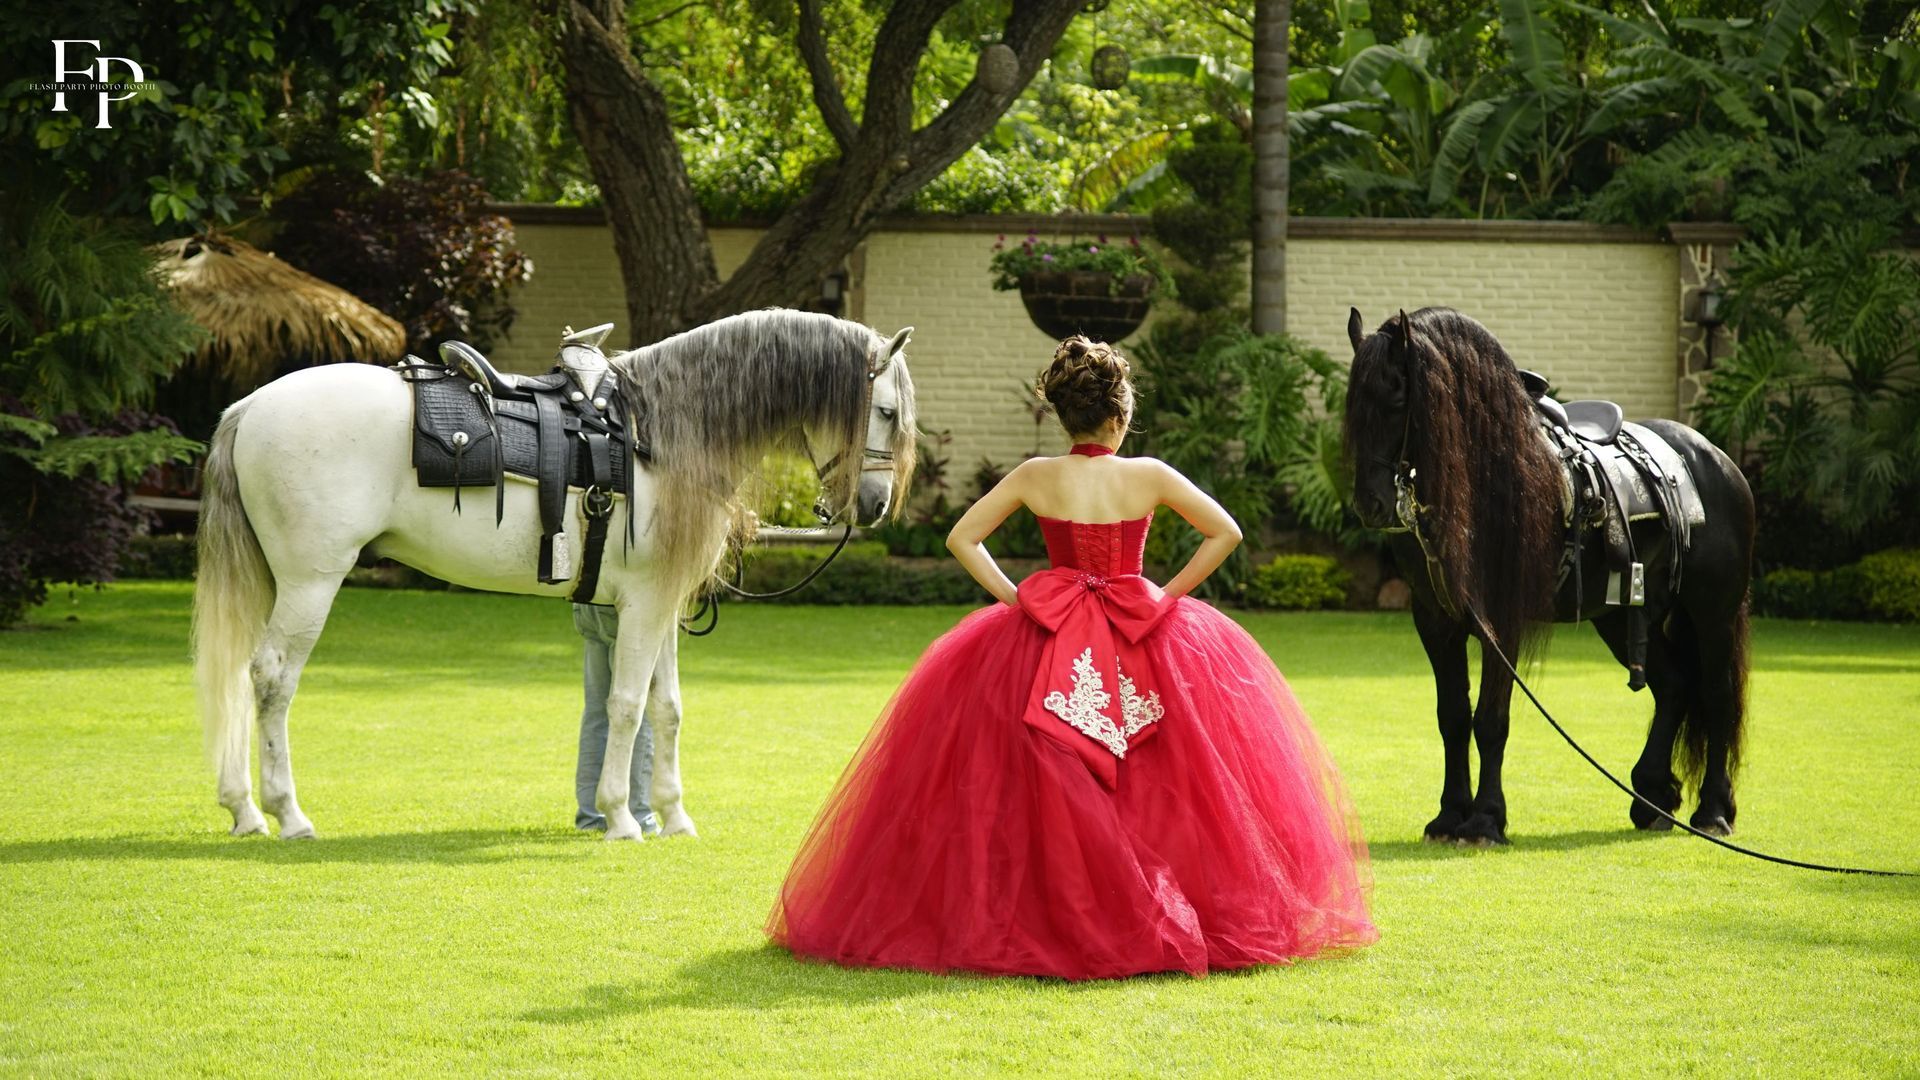 Quinceañera was captivated by the beauty of a horse during her special day.